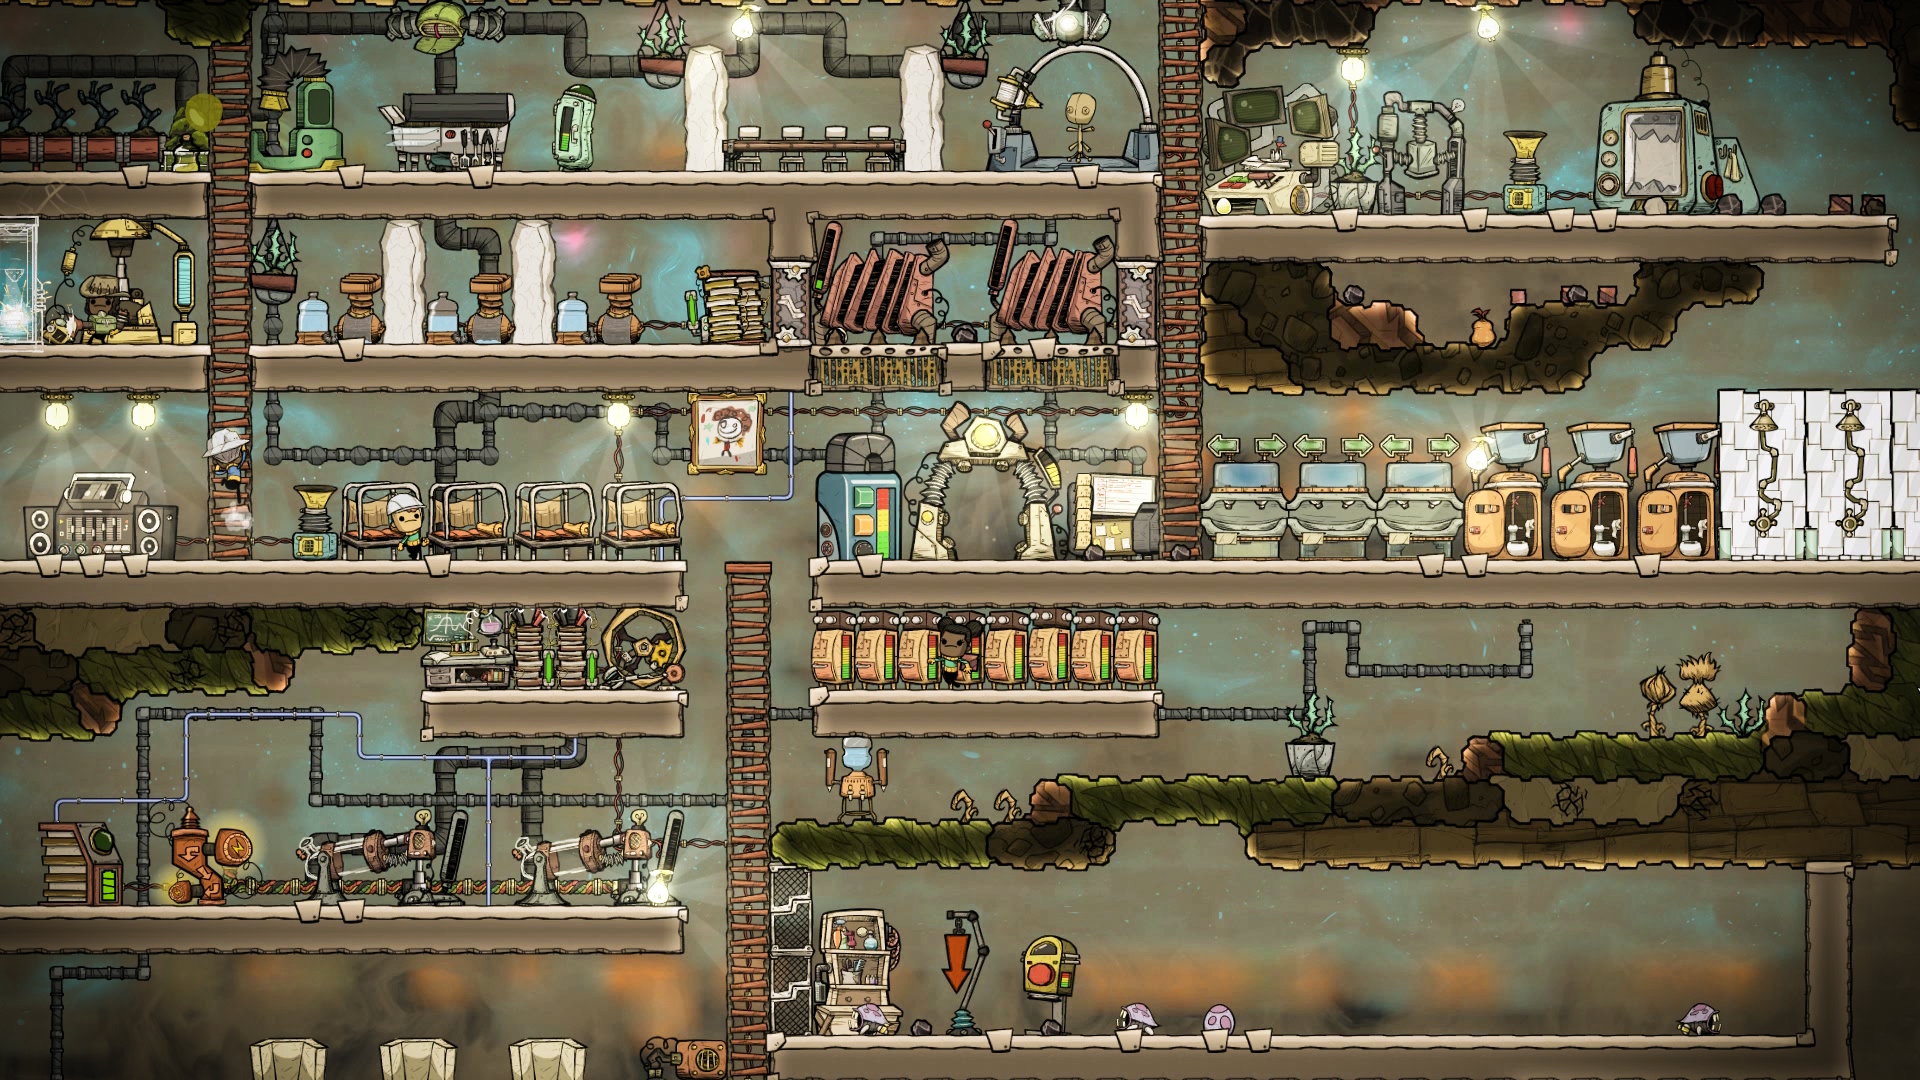 video game, oxygen not included